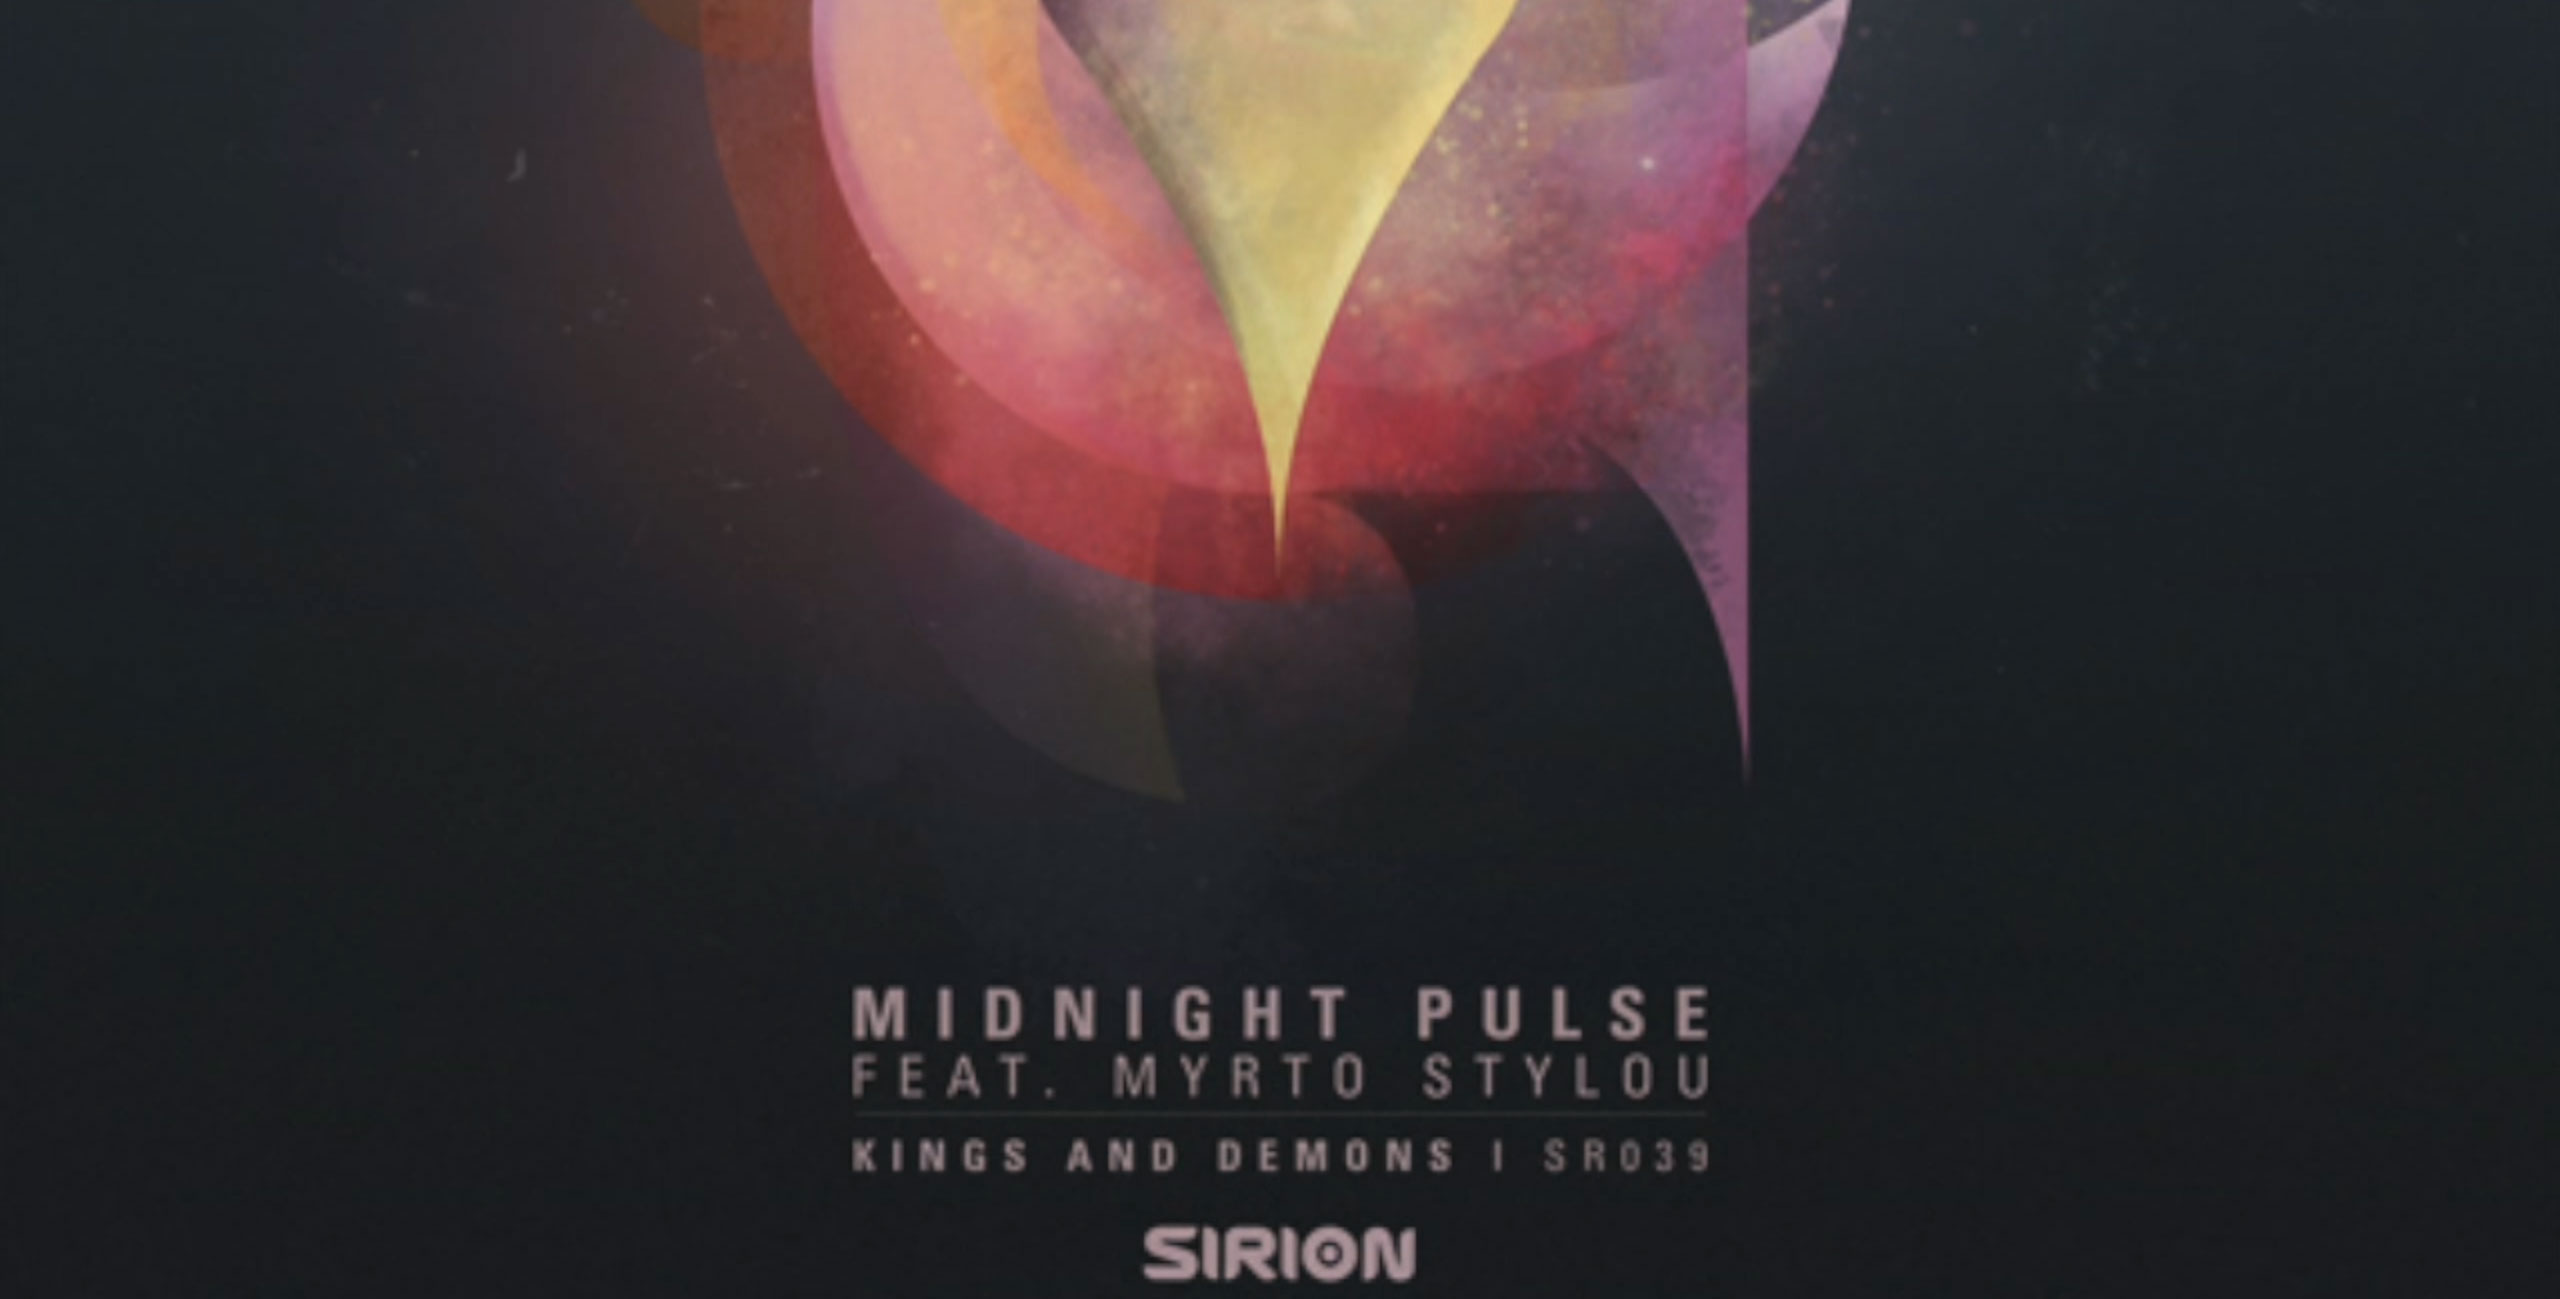 Midnight Pulse - Remain feat. Myrto Stylou - Sirion Records